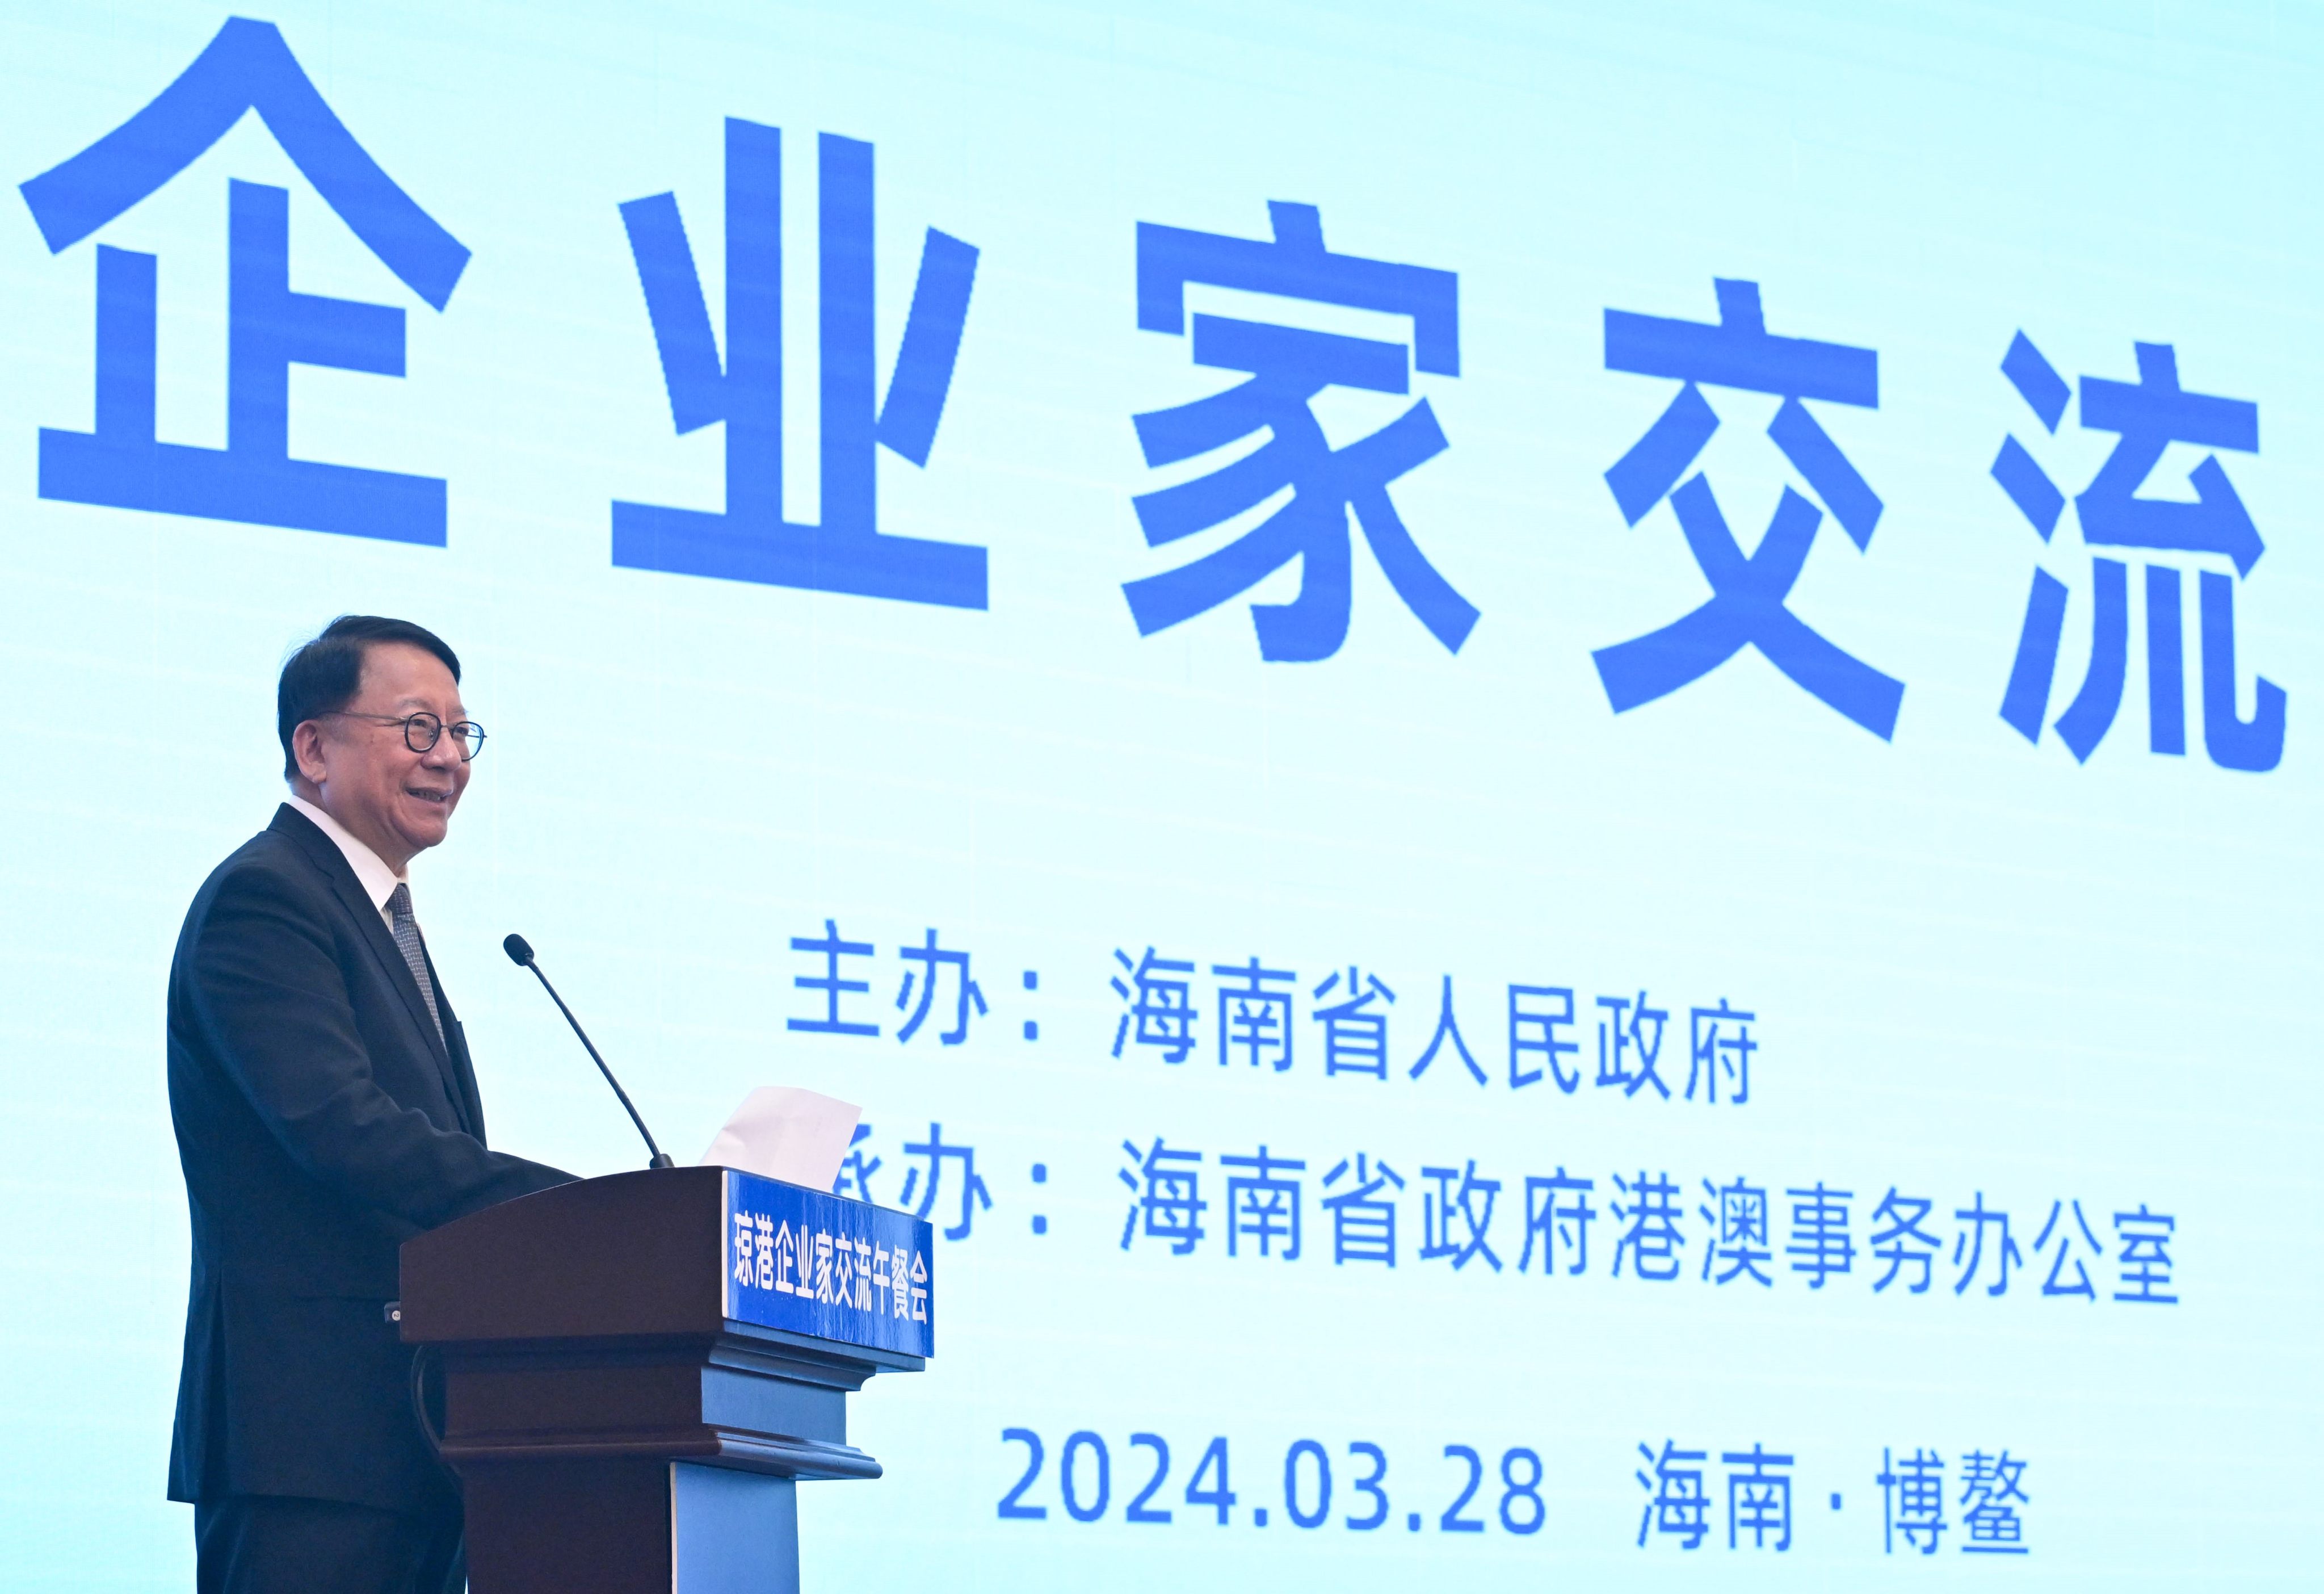 Chief Secretary Eric Chan addresses a meeting at the Boao Forum for Asia. Photo: Handout